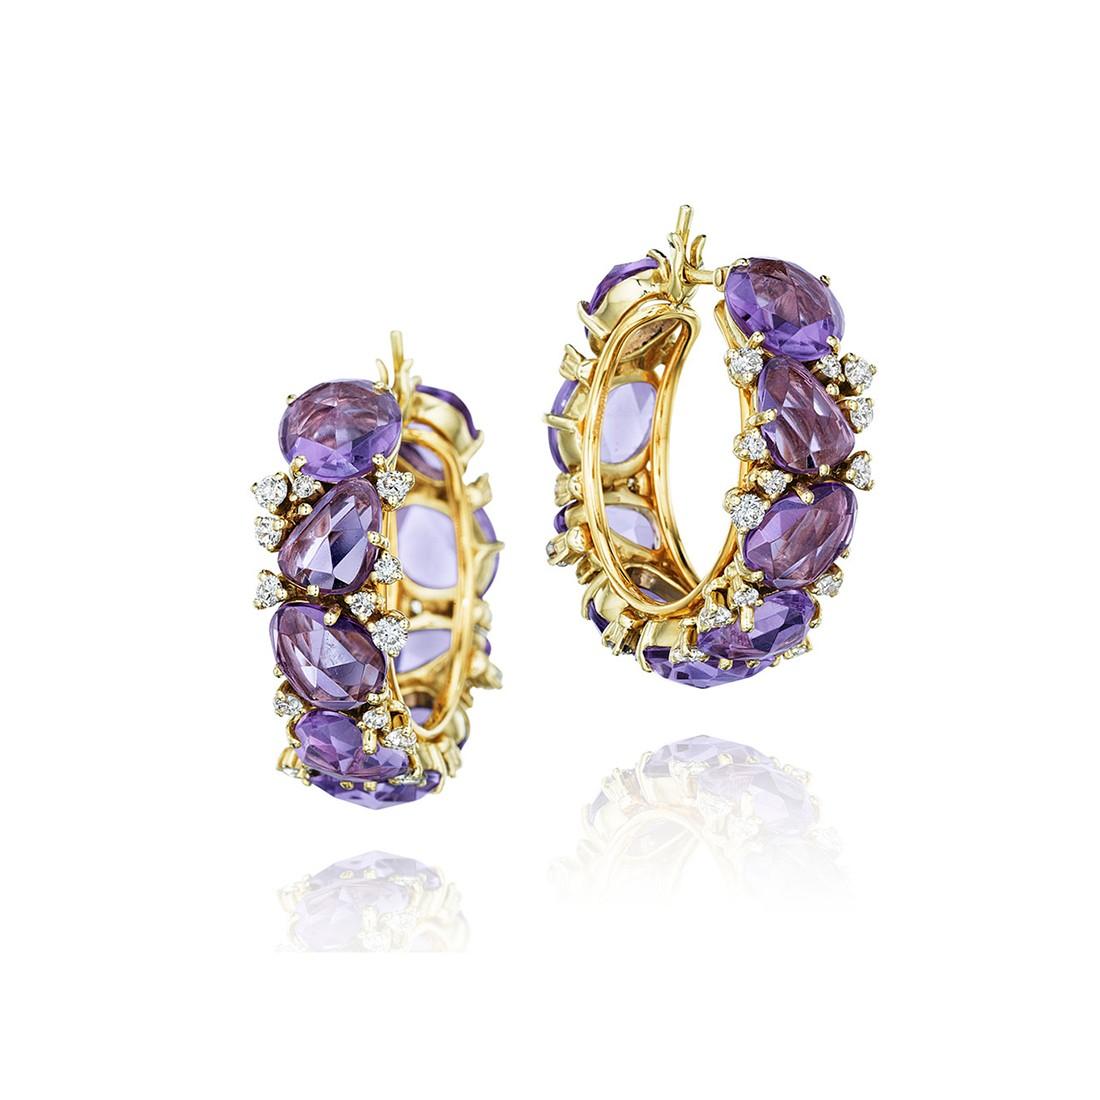 A pair of new impressive hoop earrings, crafted by Pomellato for Lulu collection, decorated with amethyst gemstones and diamonds. 
Designer: Pomellato
Material: 18K Rose Gold
Gemstone: G/VS Diamonds - approx. 1.02ctw, Amethyst
Dimensions: Hoops are